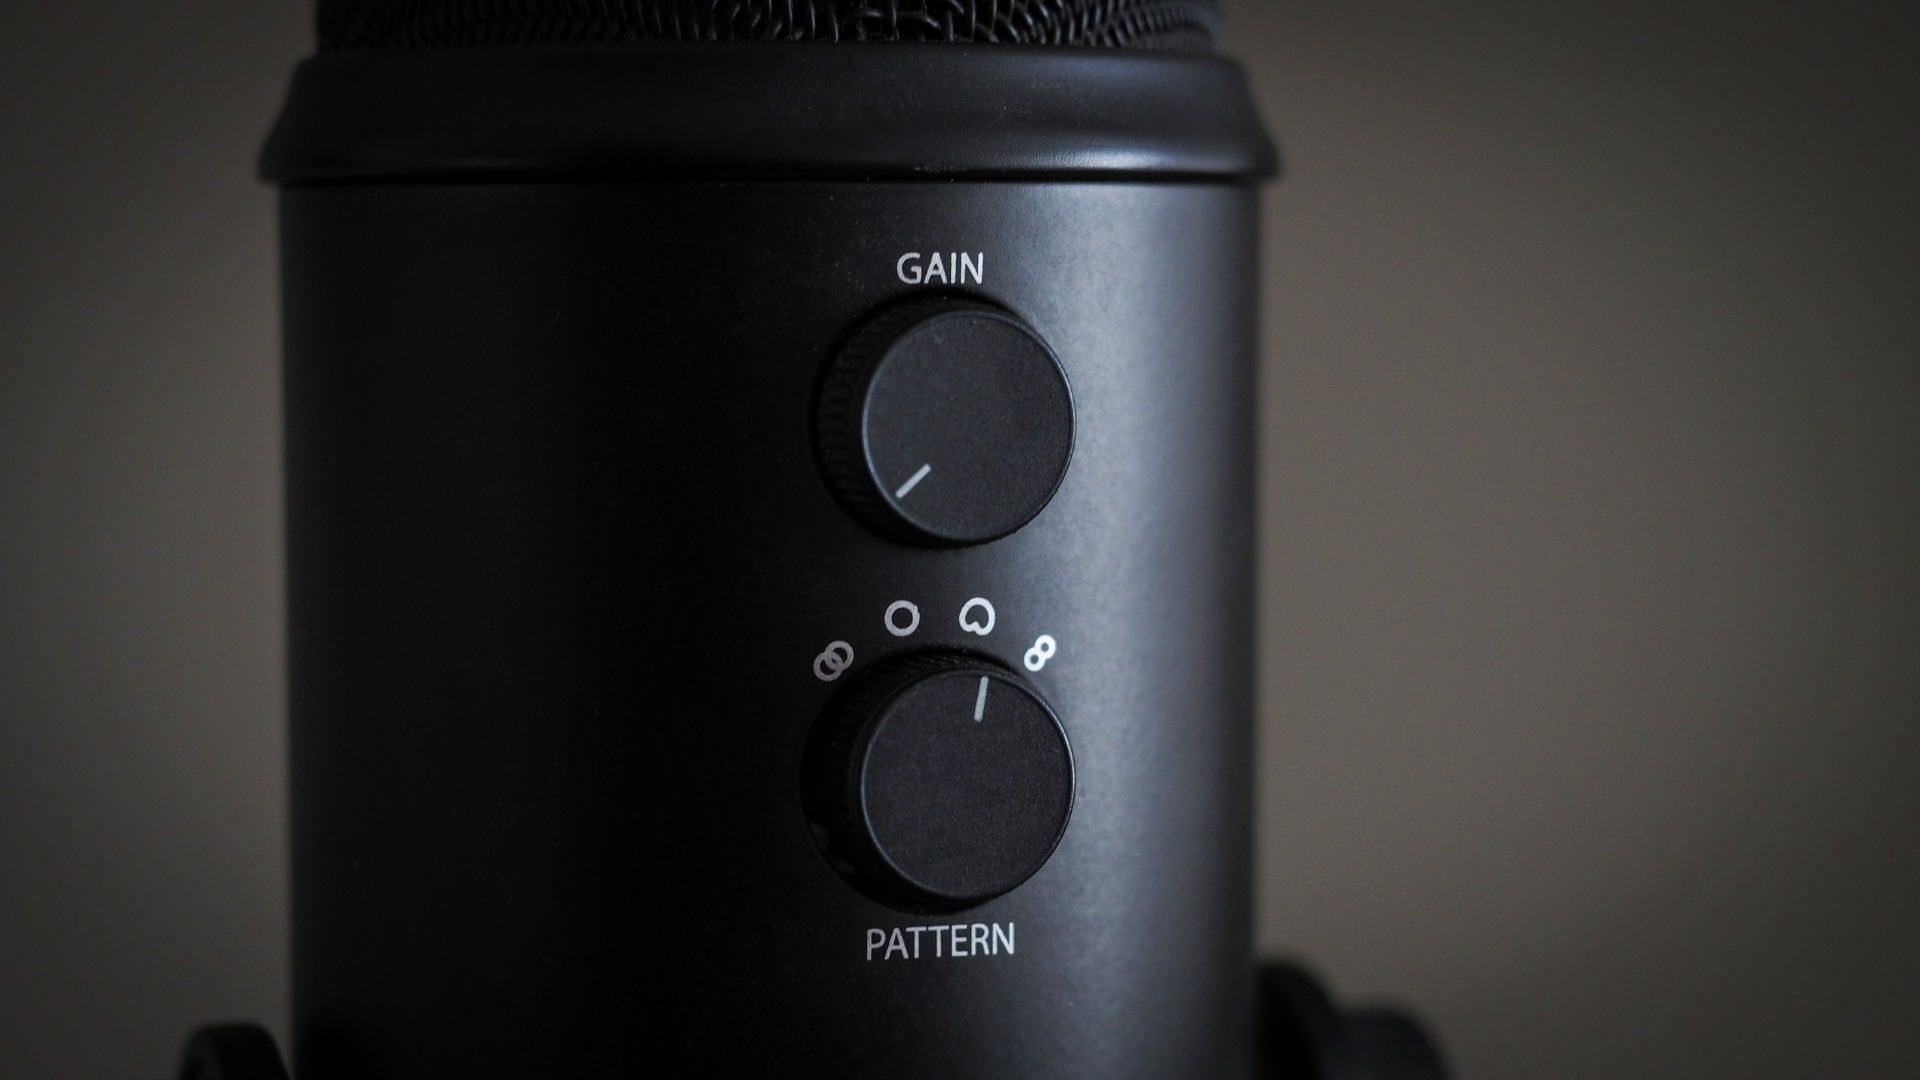 Blue Yeti review buttons showing the gain and pattern buttons.